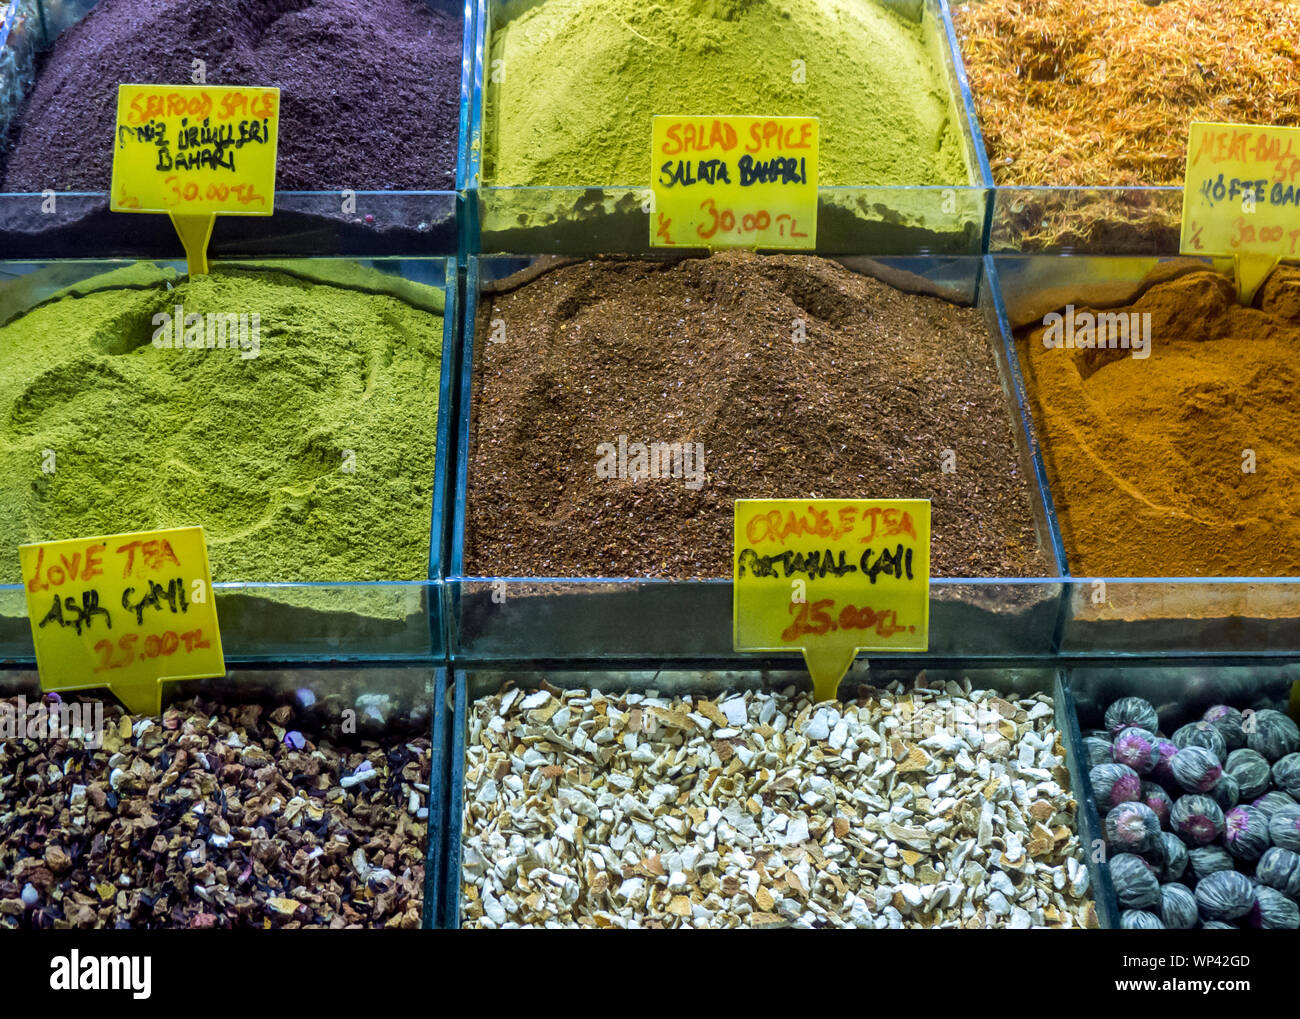 ISTANBUL, TURKEY - MAY 11, 2011 : A colourful variety of spices and teas for sale at a store within the Spice Bazaar in the Eminonu district of Istanb Stock Photo